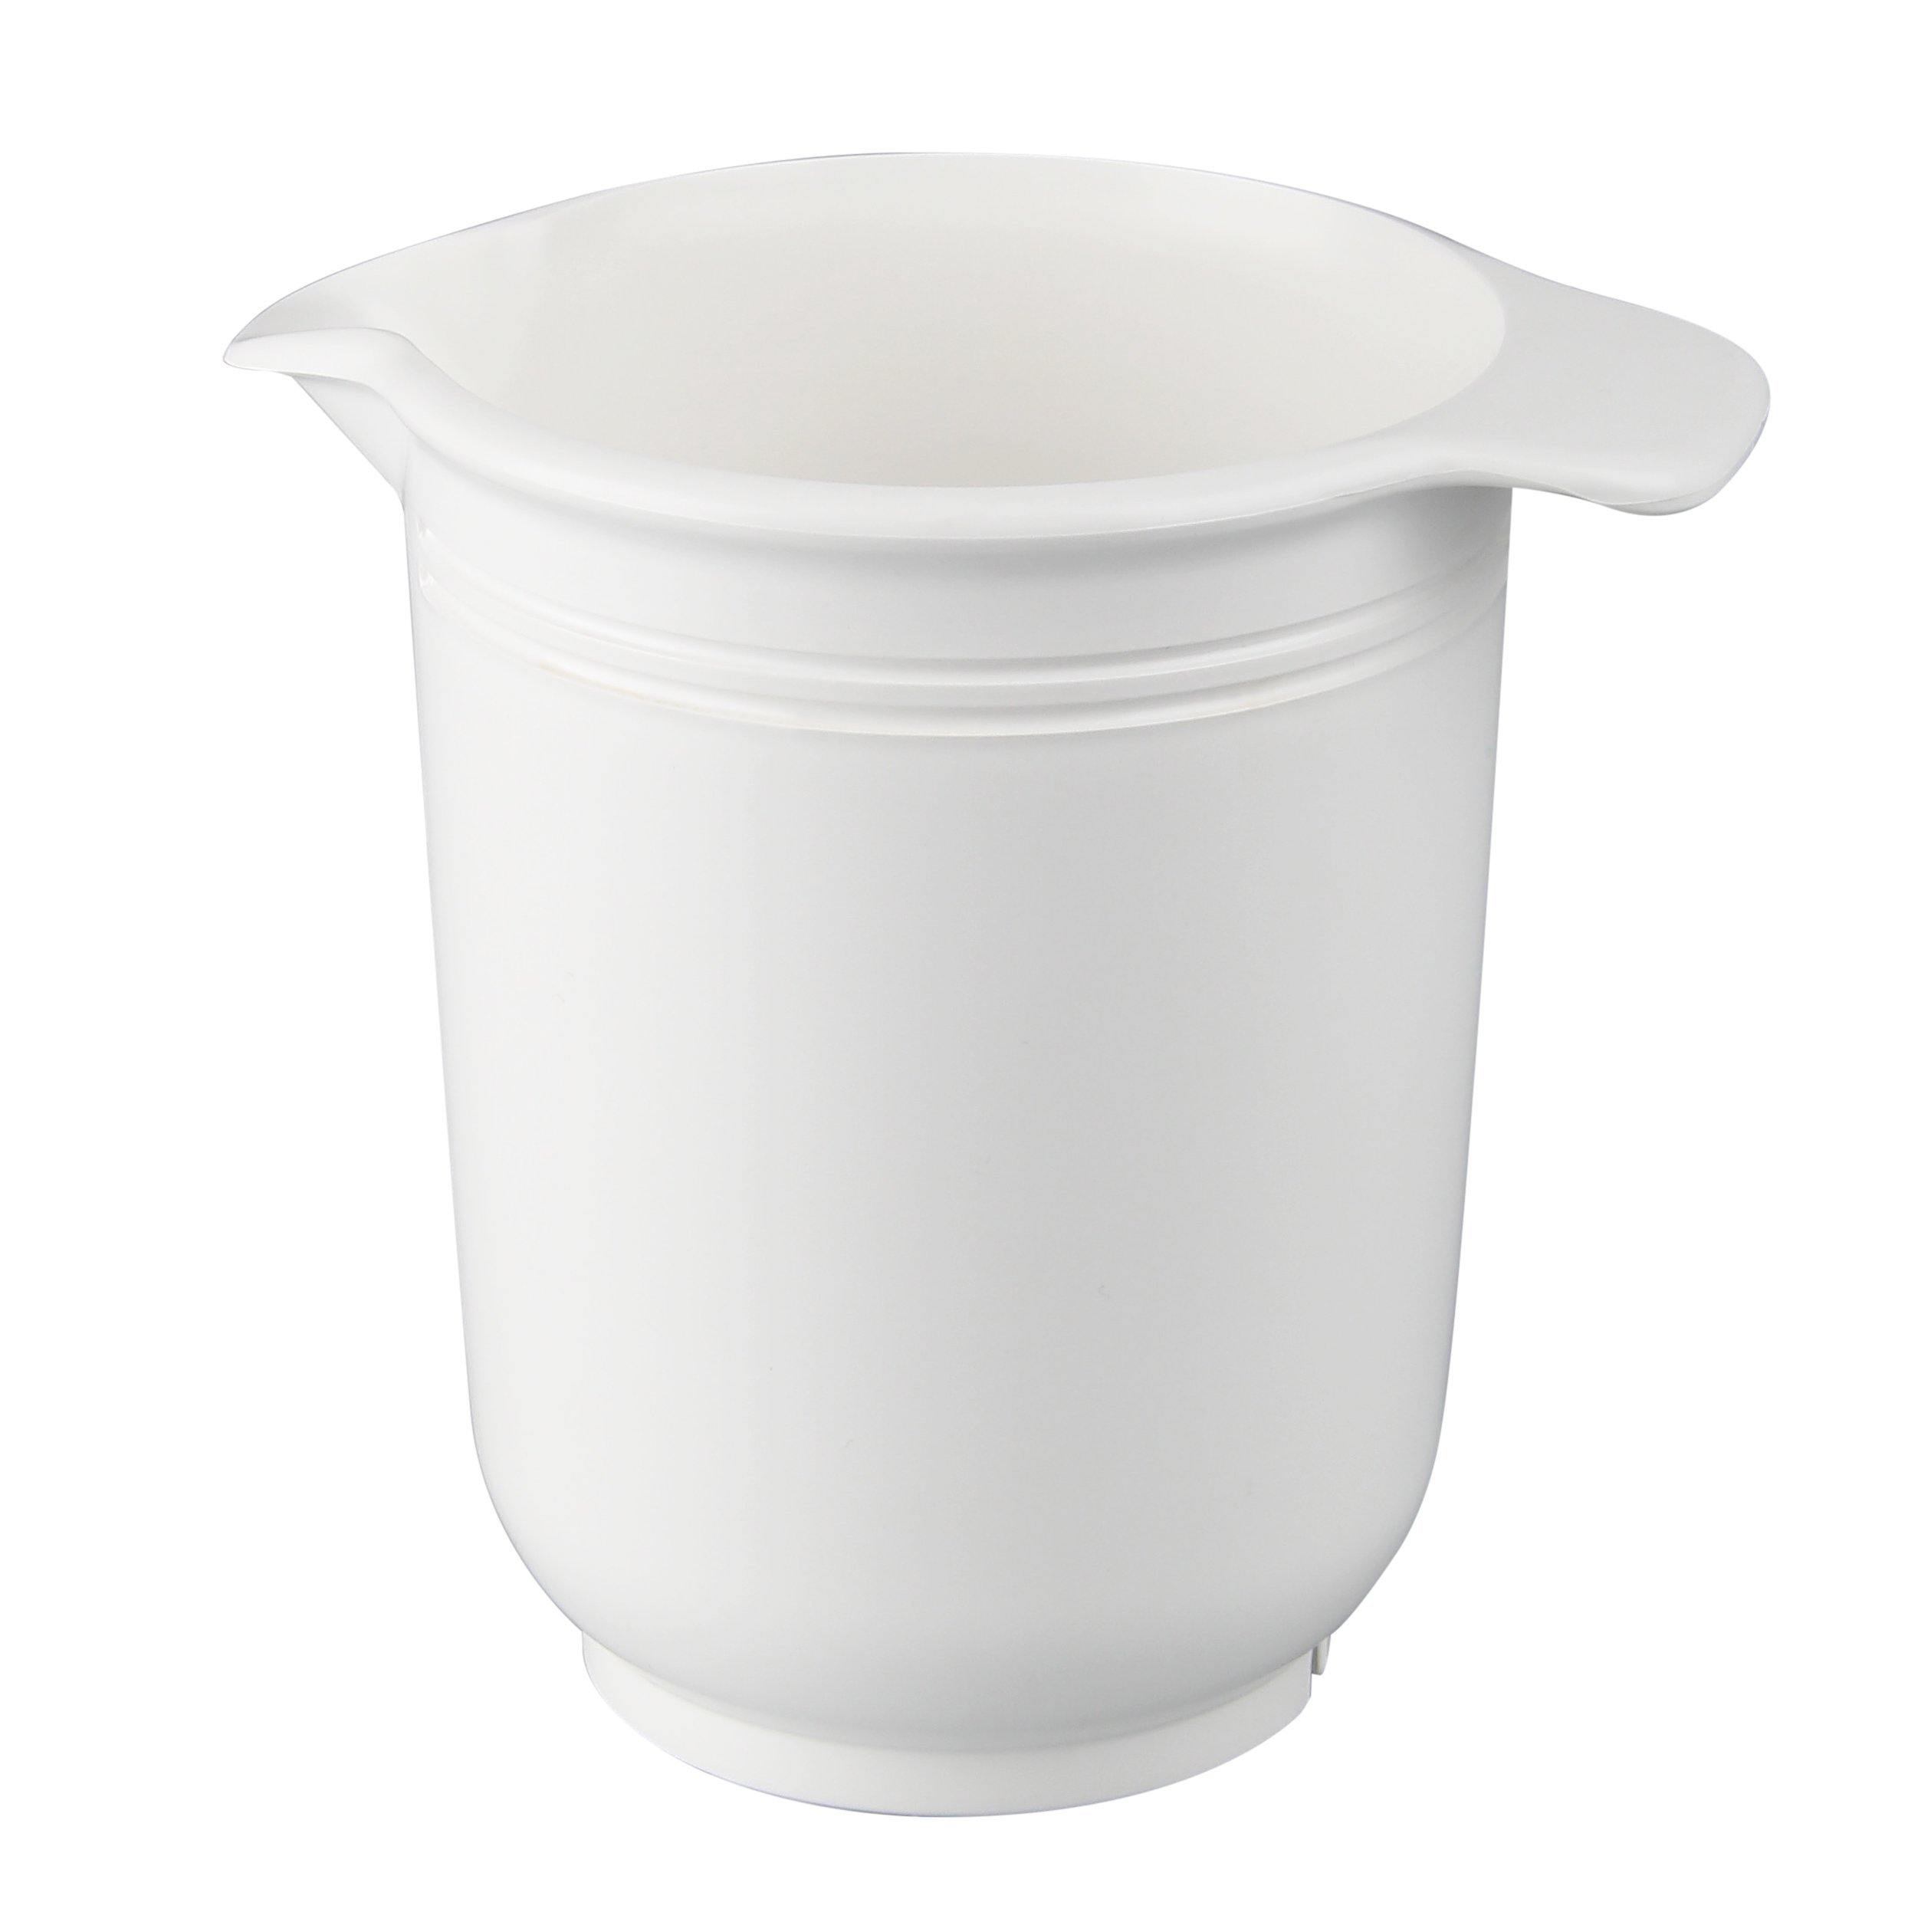 Dr. Oetker Mixing Bowl,  White, 11X16 Cm, 1L - Whole and All